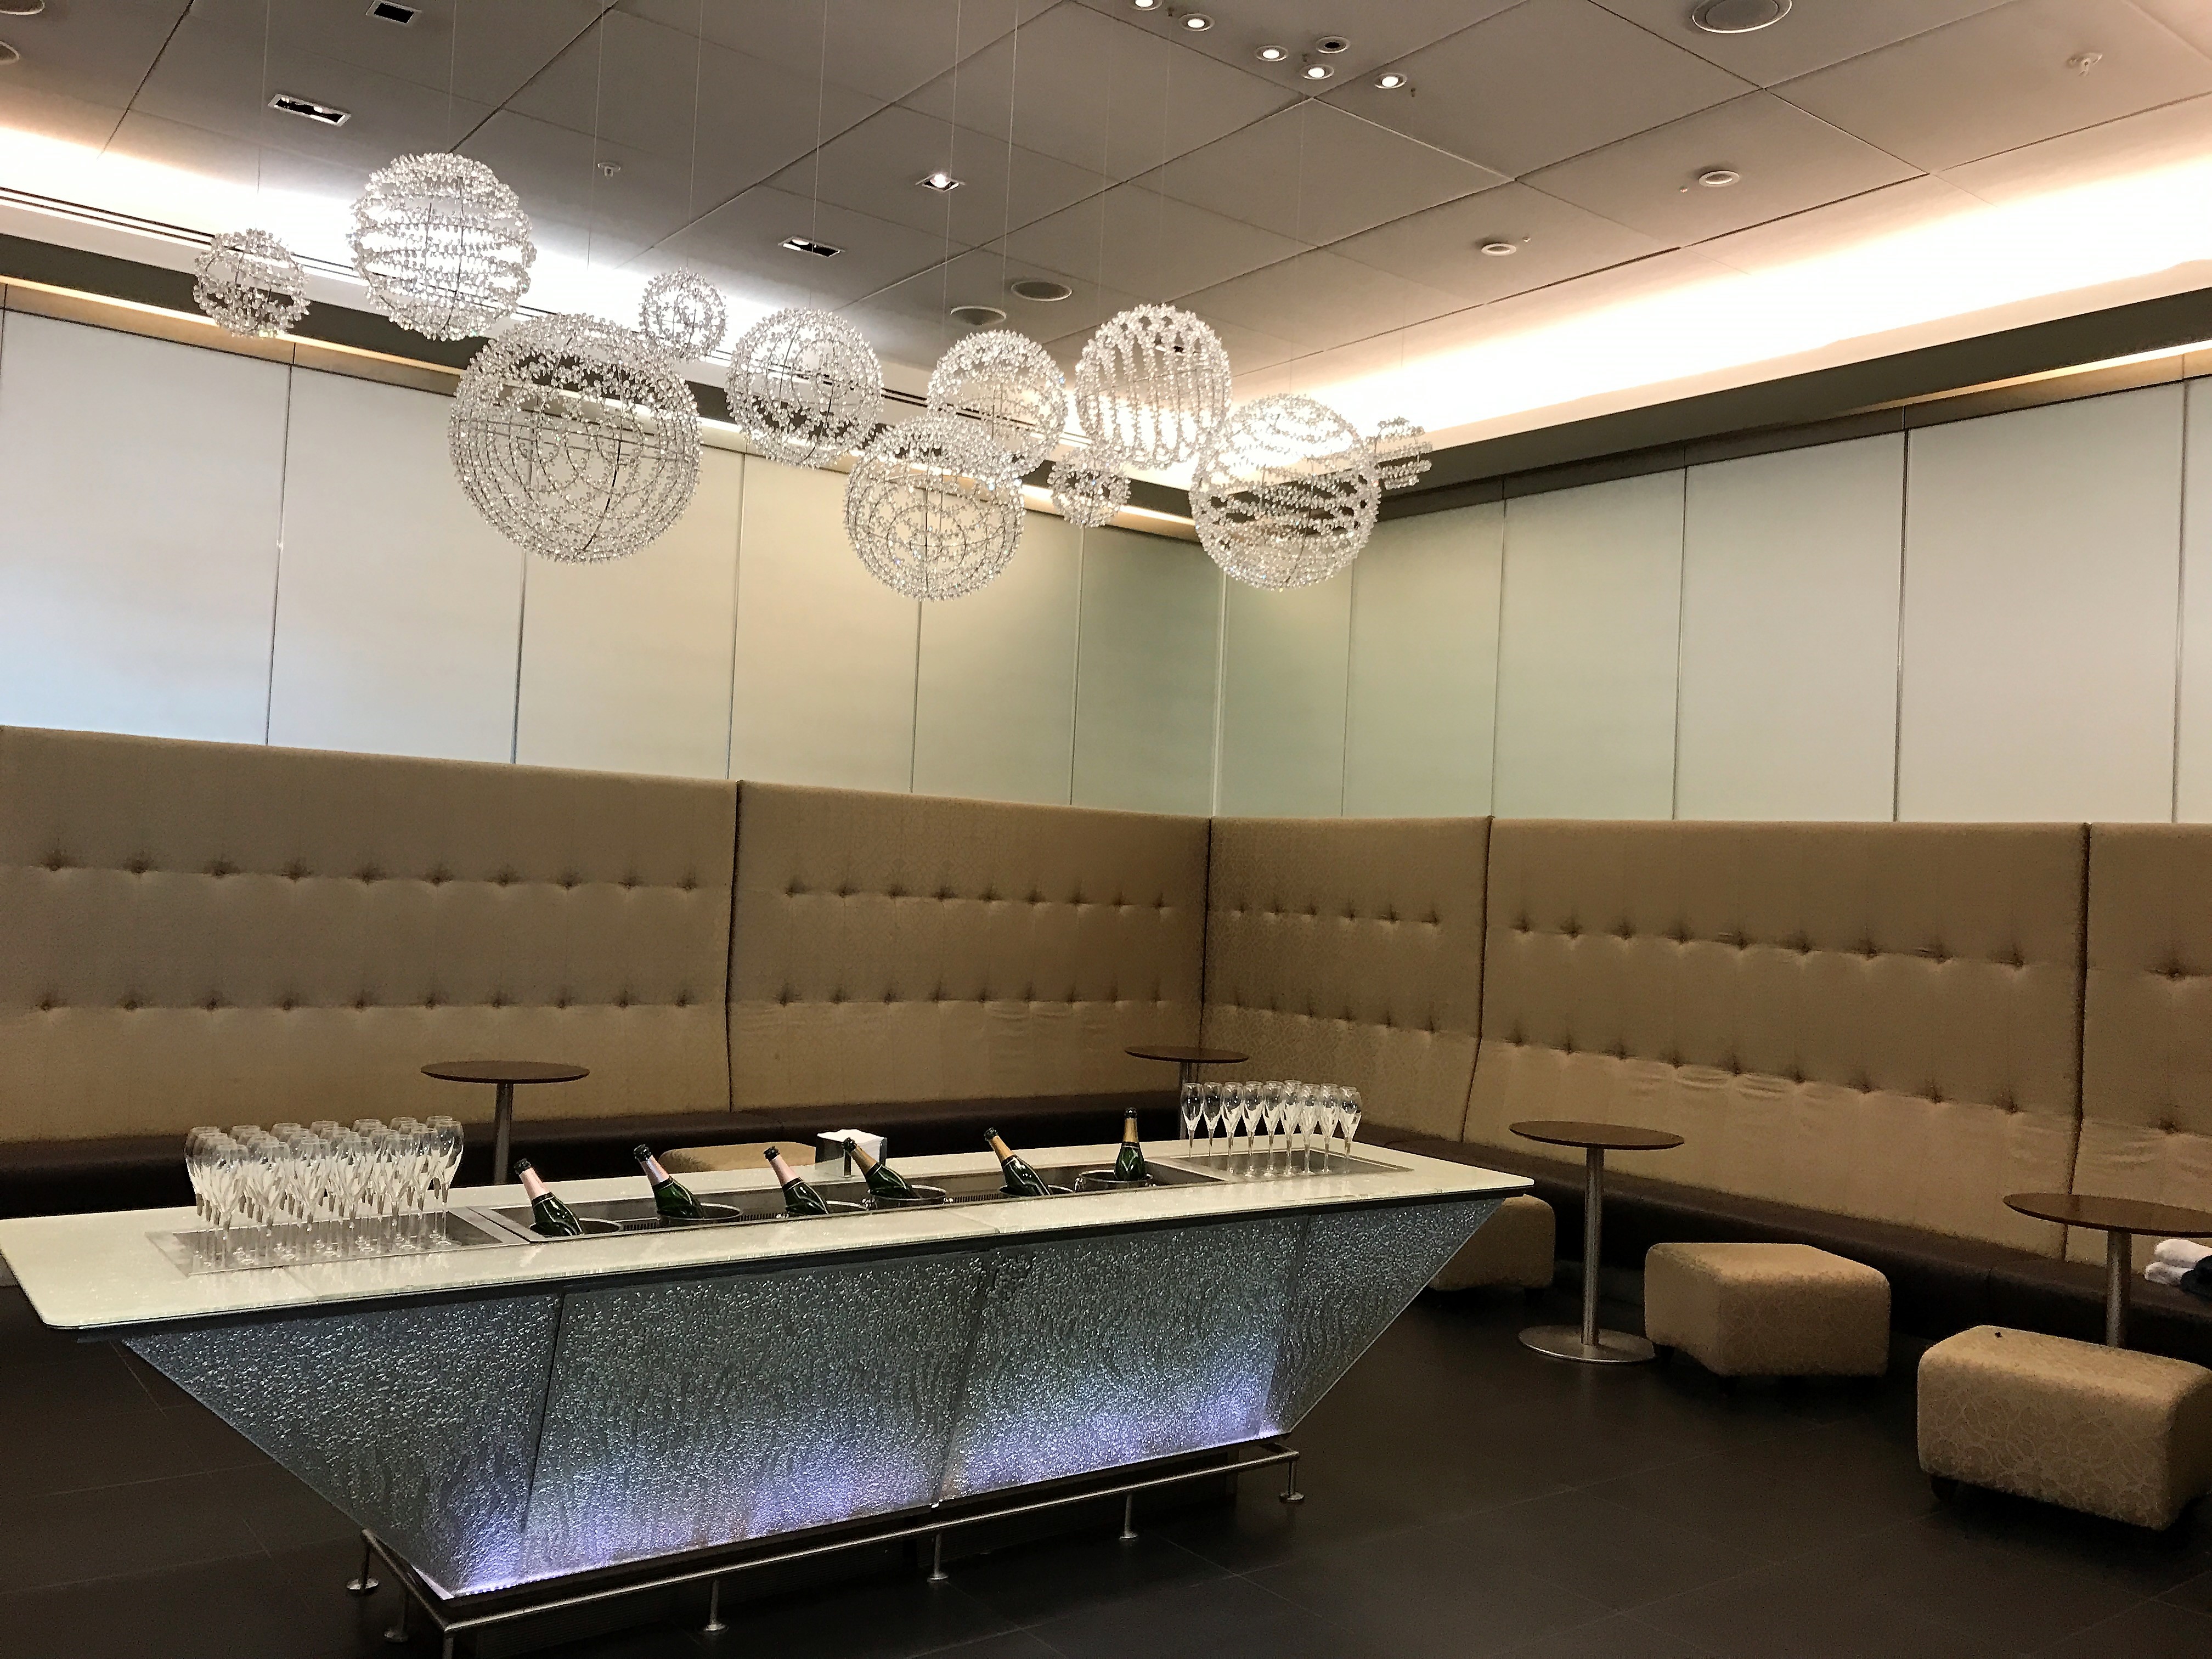 BA T5 First lounge review